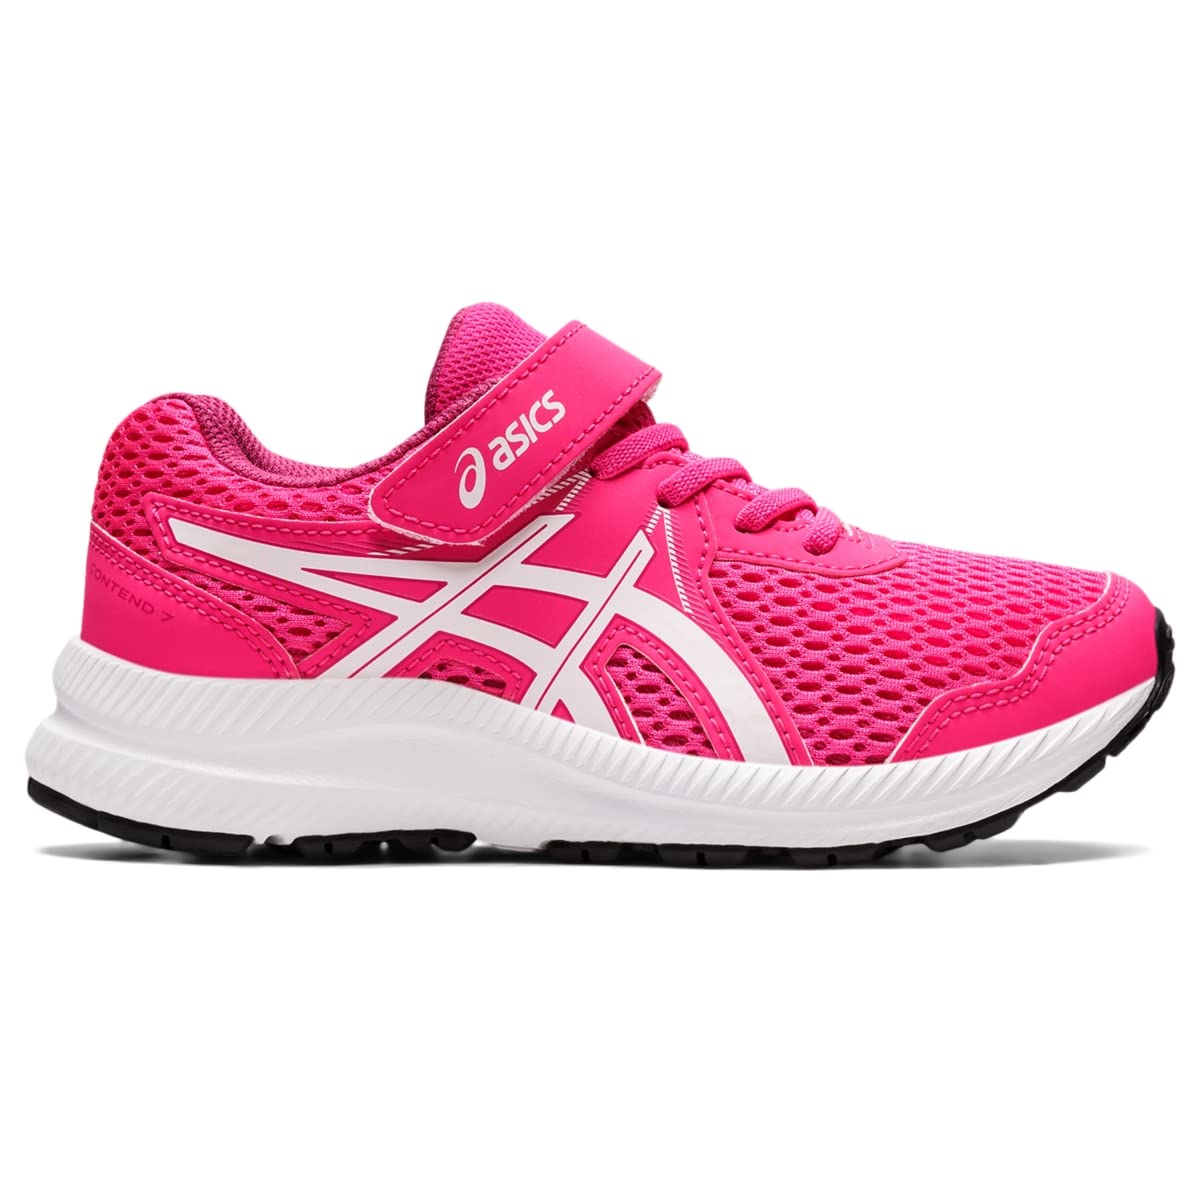 ASICS Kid's Contend 7 Pre-School Running Shoes